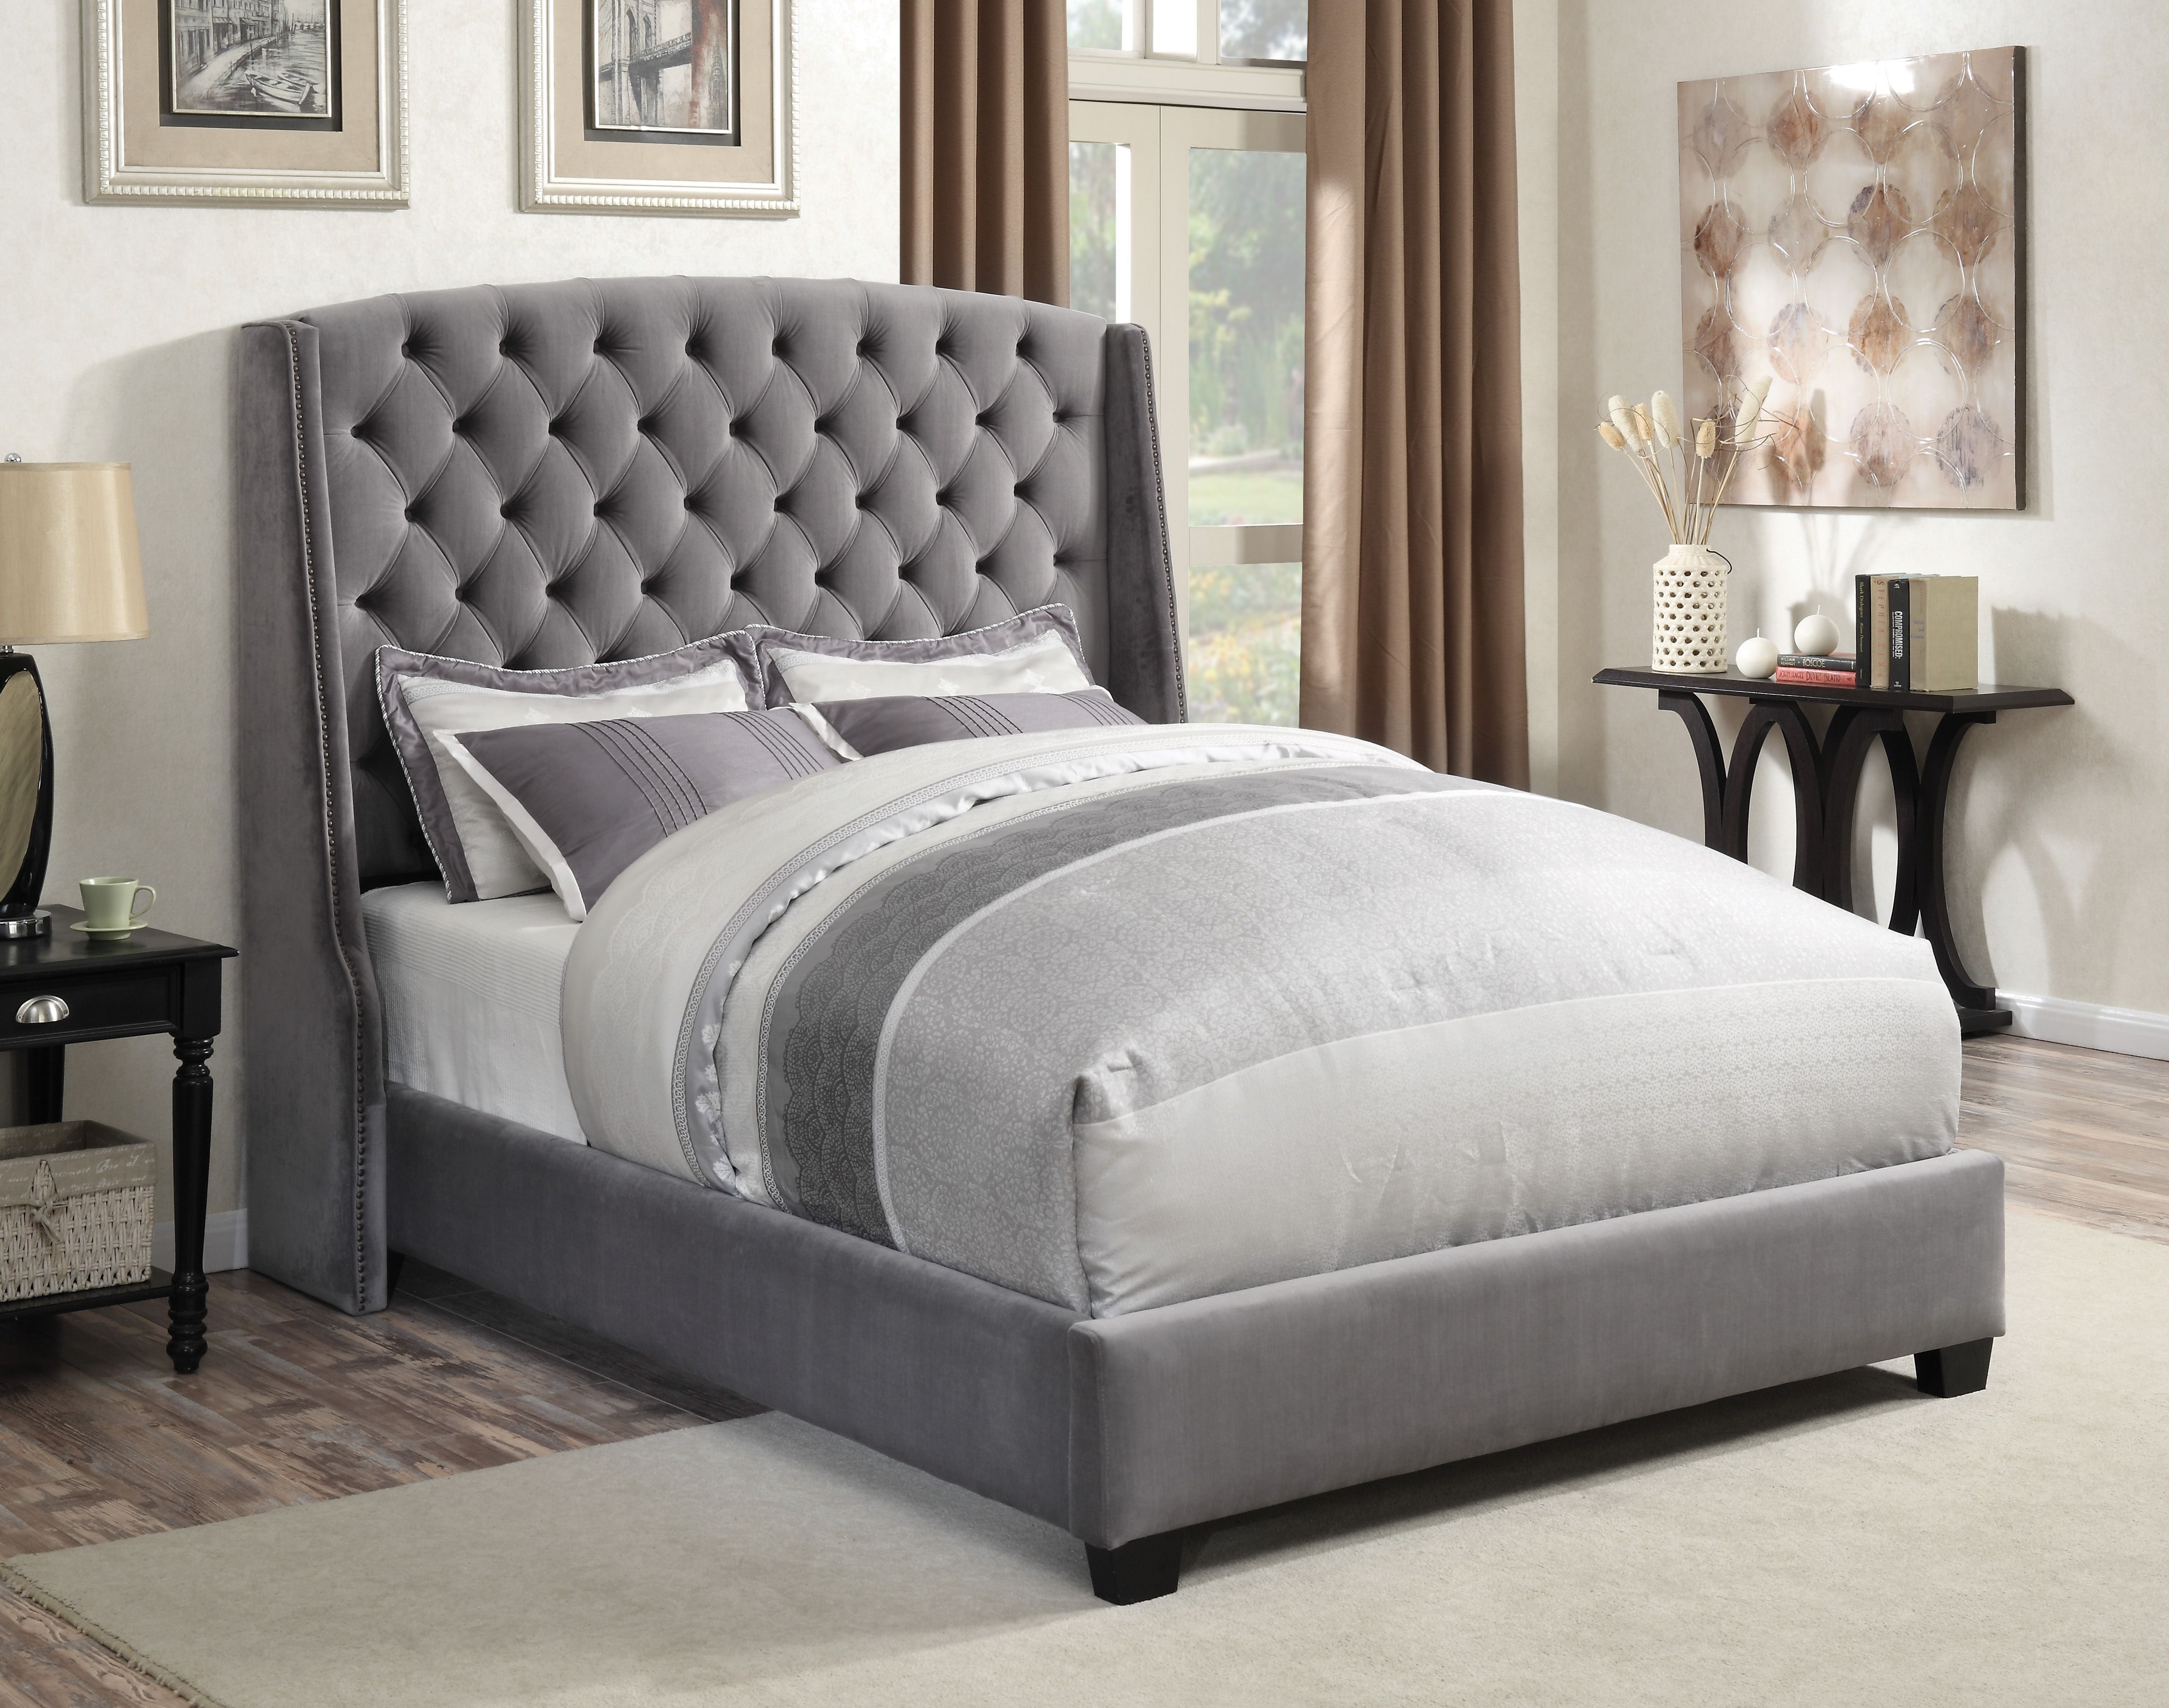 Pissarro Collection Grey Velvet Fabric Wingback Eastern King Size Bed W Nailhead Button Tufted Headboard in dimensions 4464 X 3516